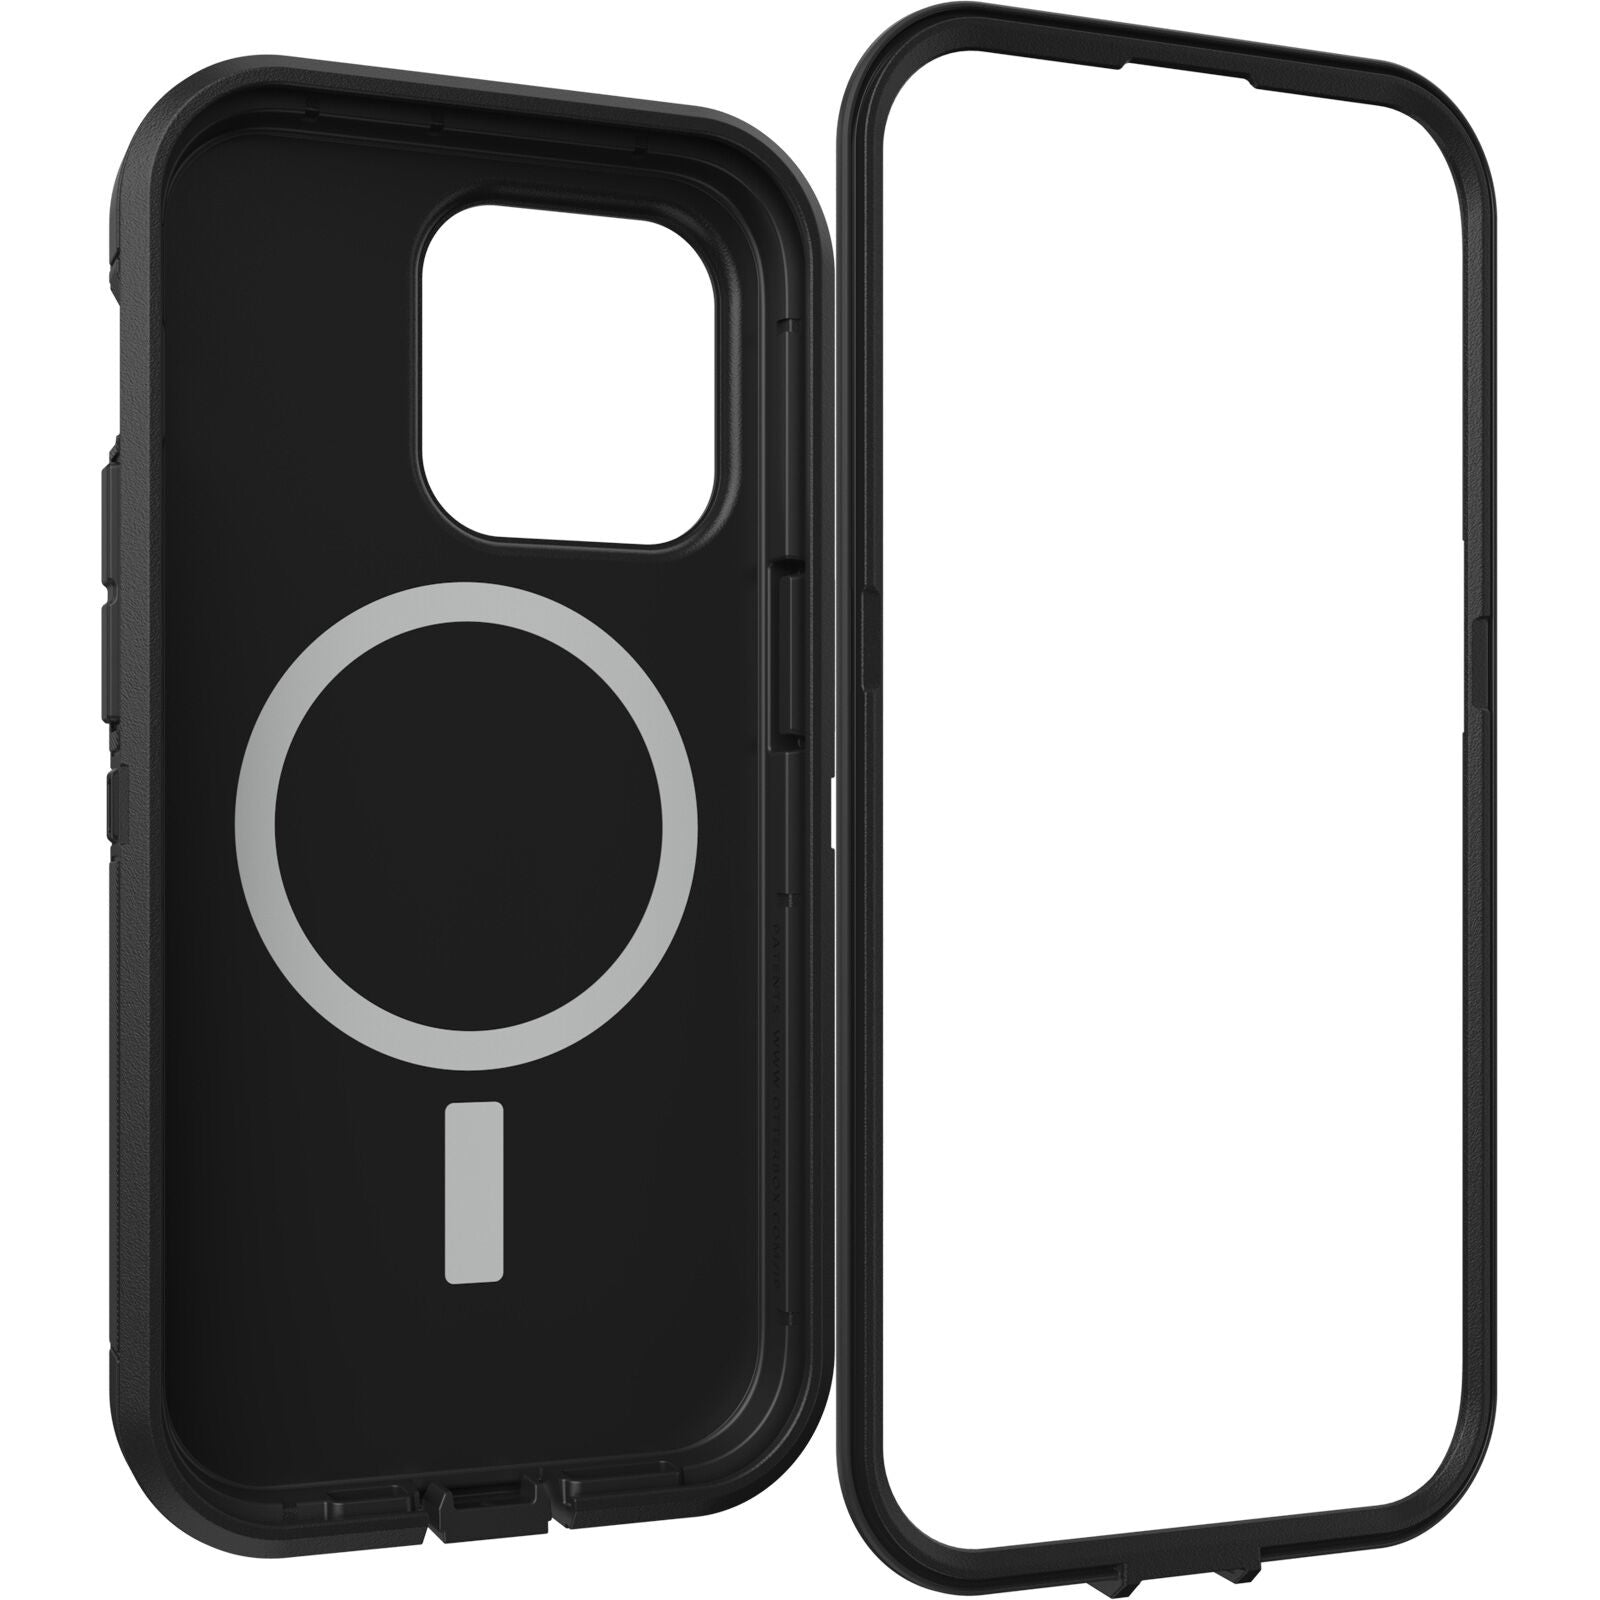 OtterBox Defender XT Case for iPhone 14 Pro with MagSafe, Shockproof, Drop proof, Ultra-Rugged, Protective Case, 5x Tested to Military Standard, Black